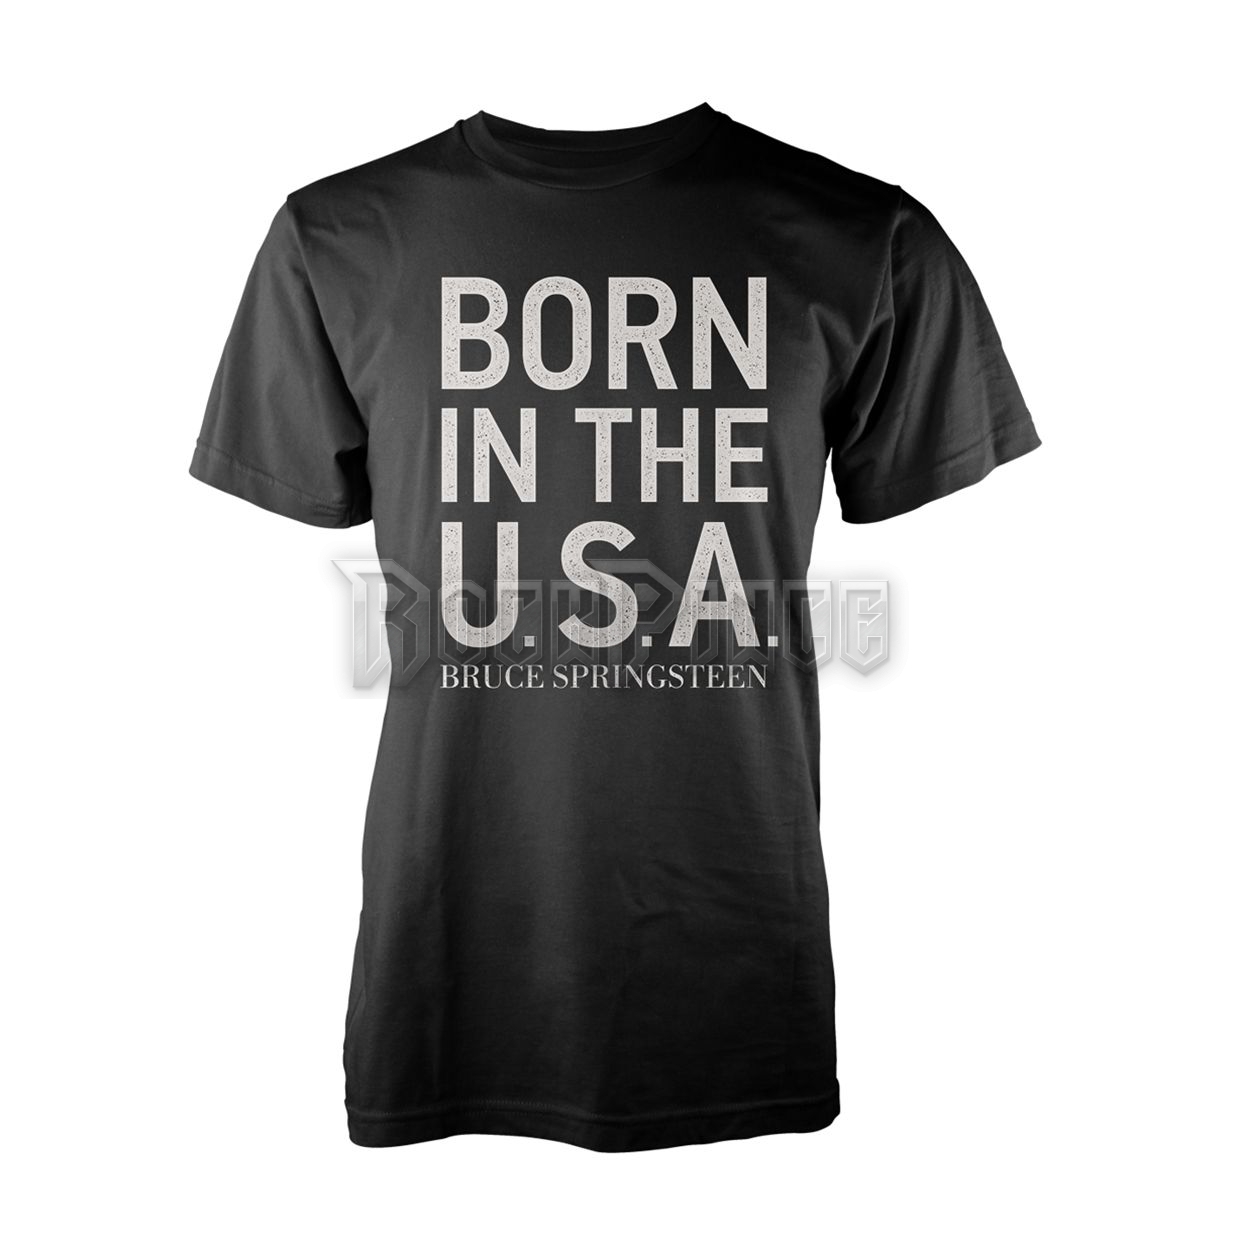 BRUCE SPRINGSTEEN - BORN IN THE USA - RTBSP0712